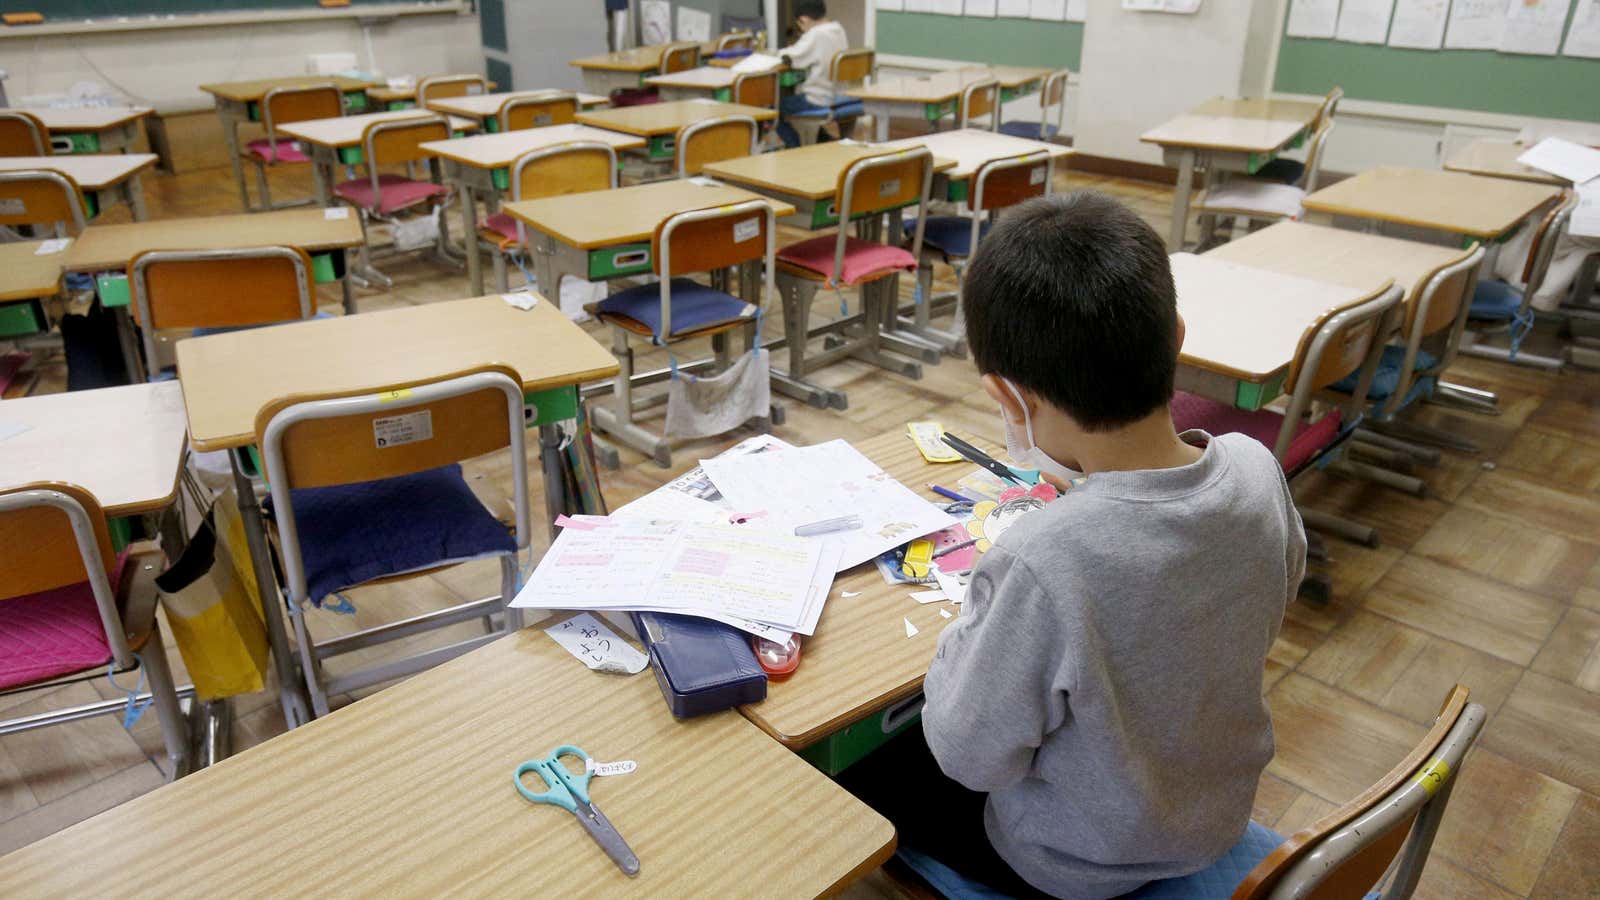 Two students do self-study at an elementary school where the facility was opened for children who cannot stay at home alone while their parents are at work, in Saitama, Japan.